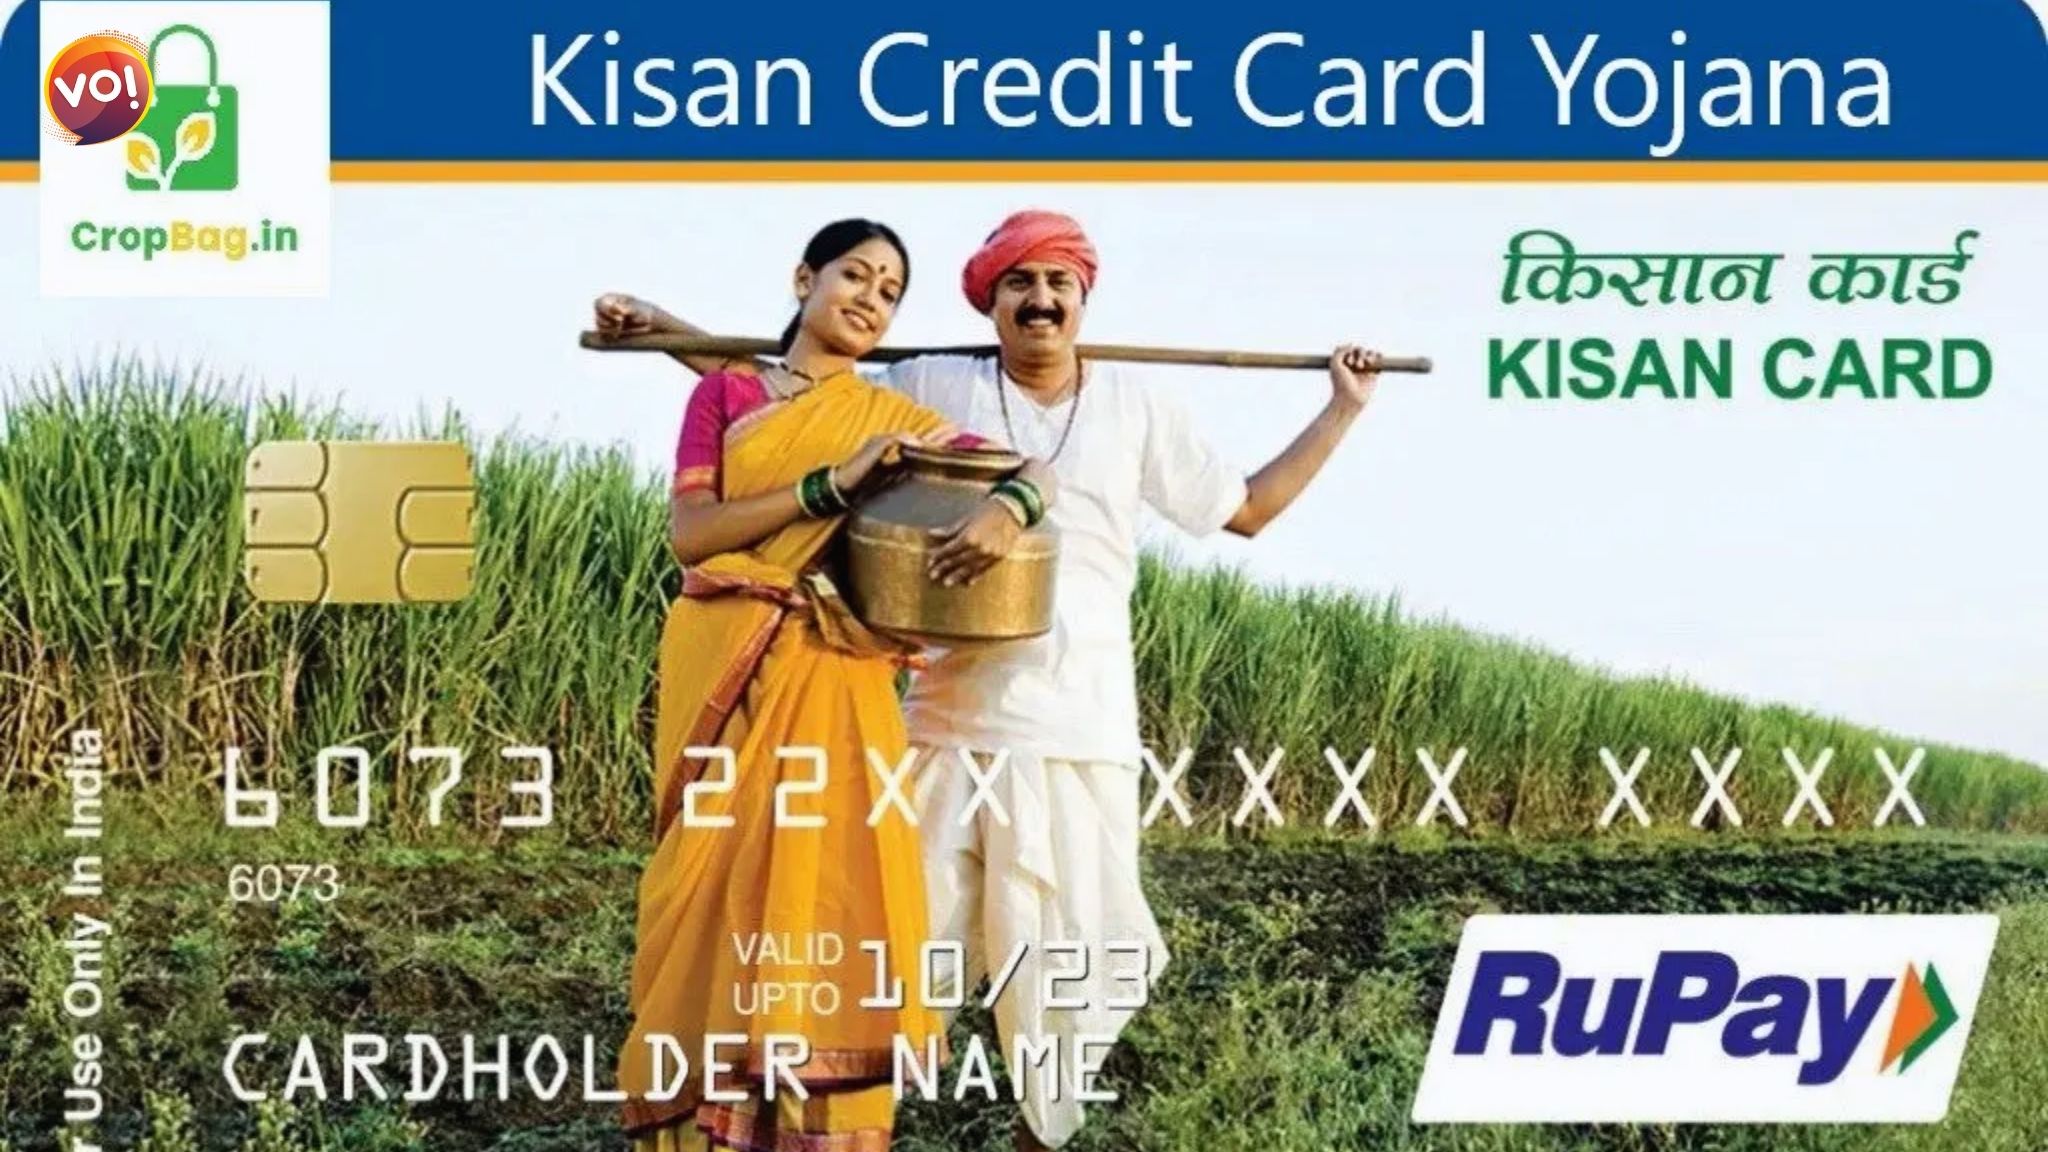 Gujarat to Expand Micro-ATM and Rupay Kisan Credit Card Initiatives Statewide